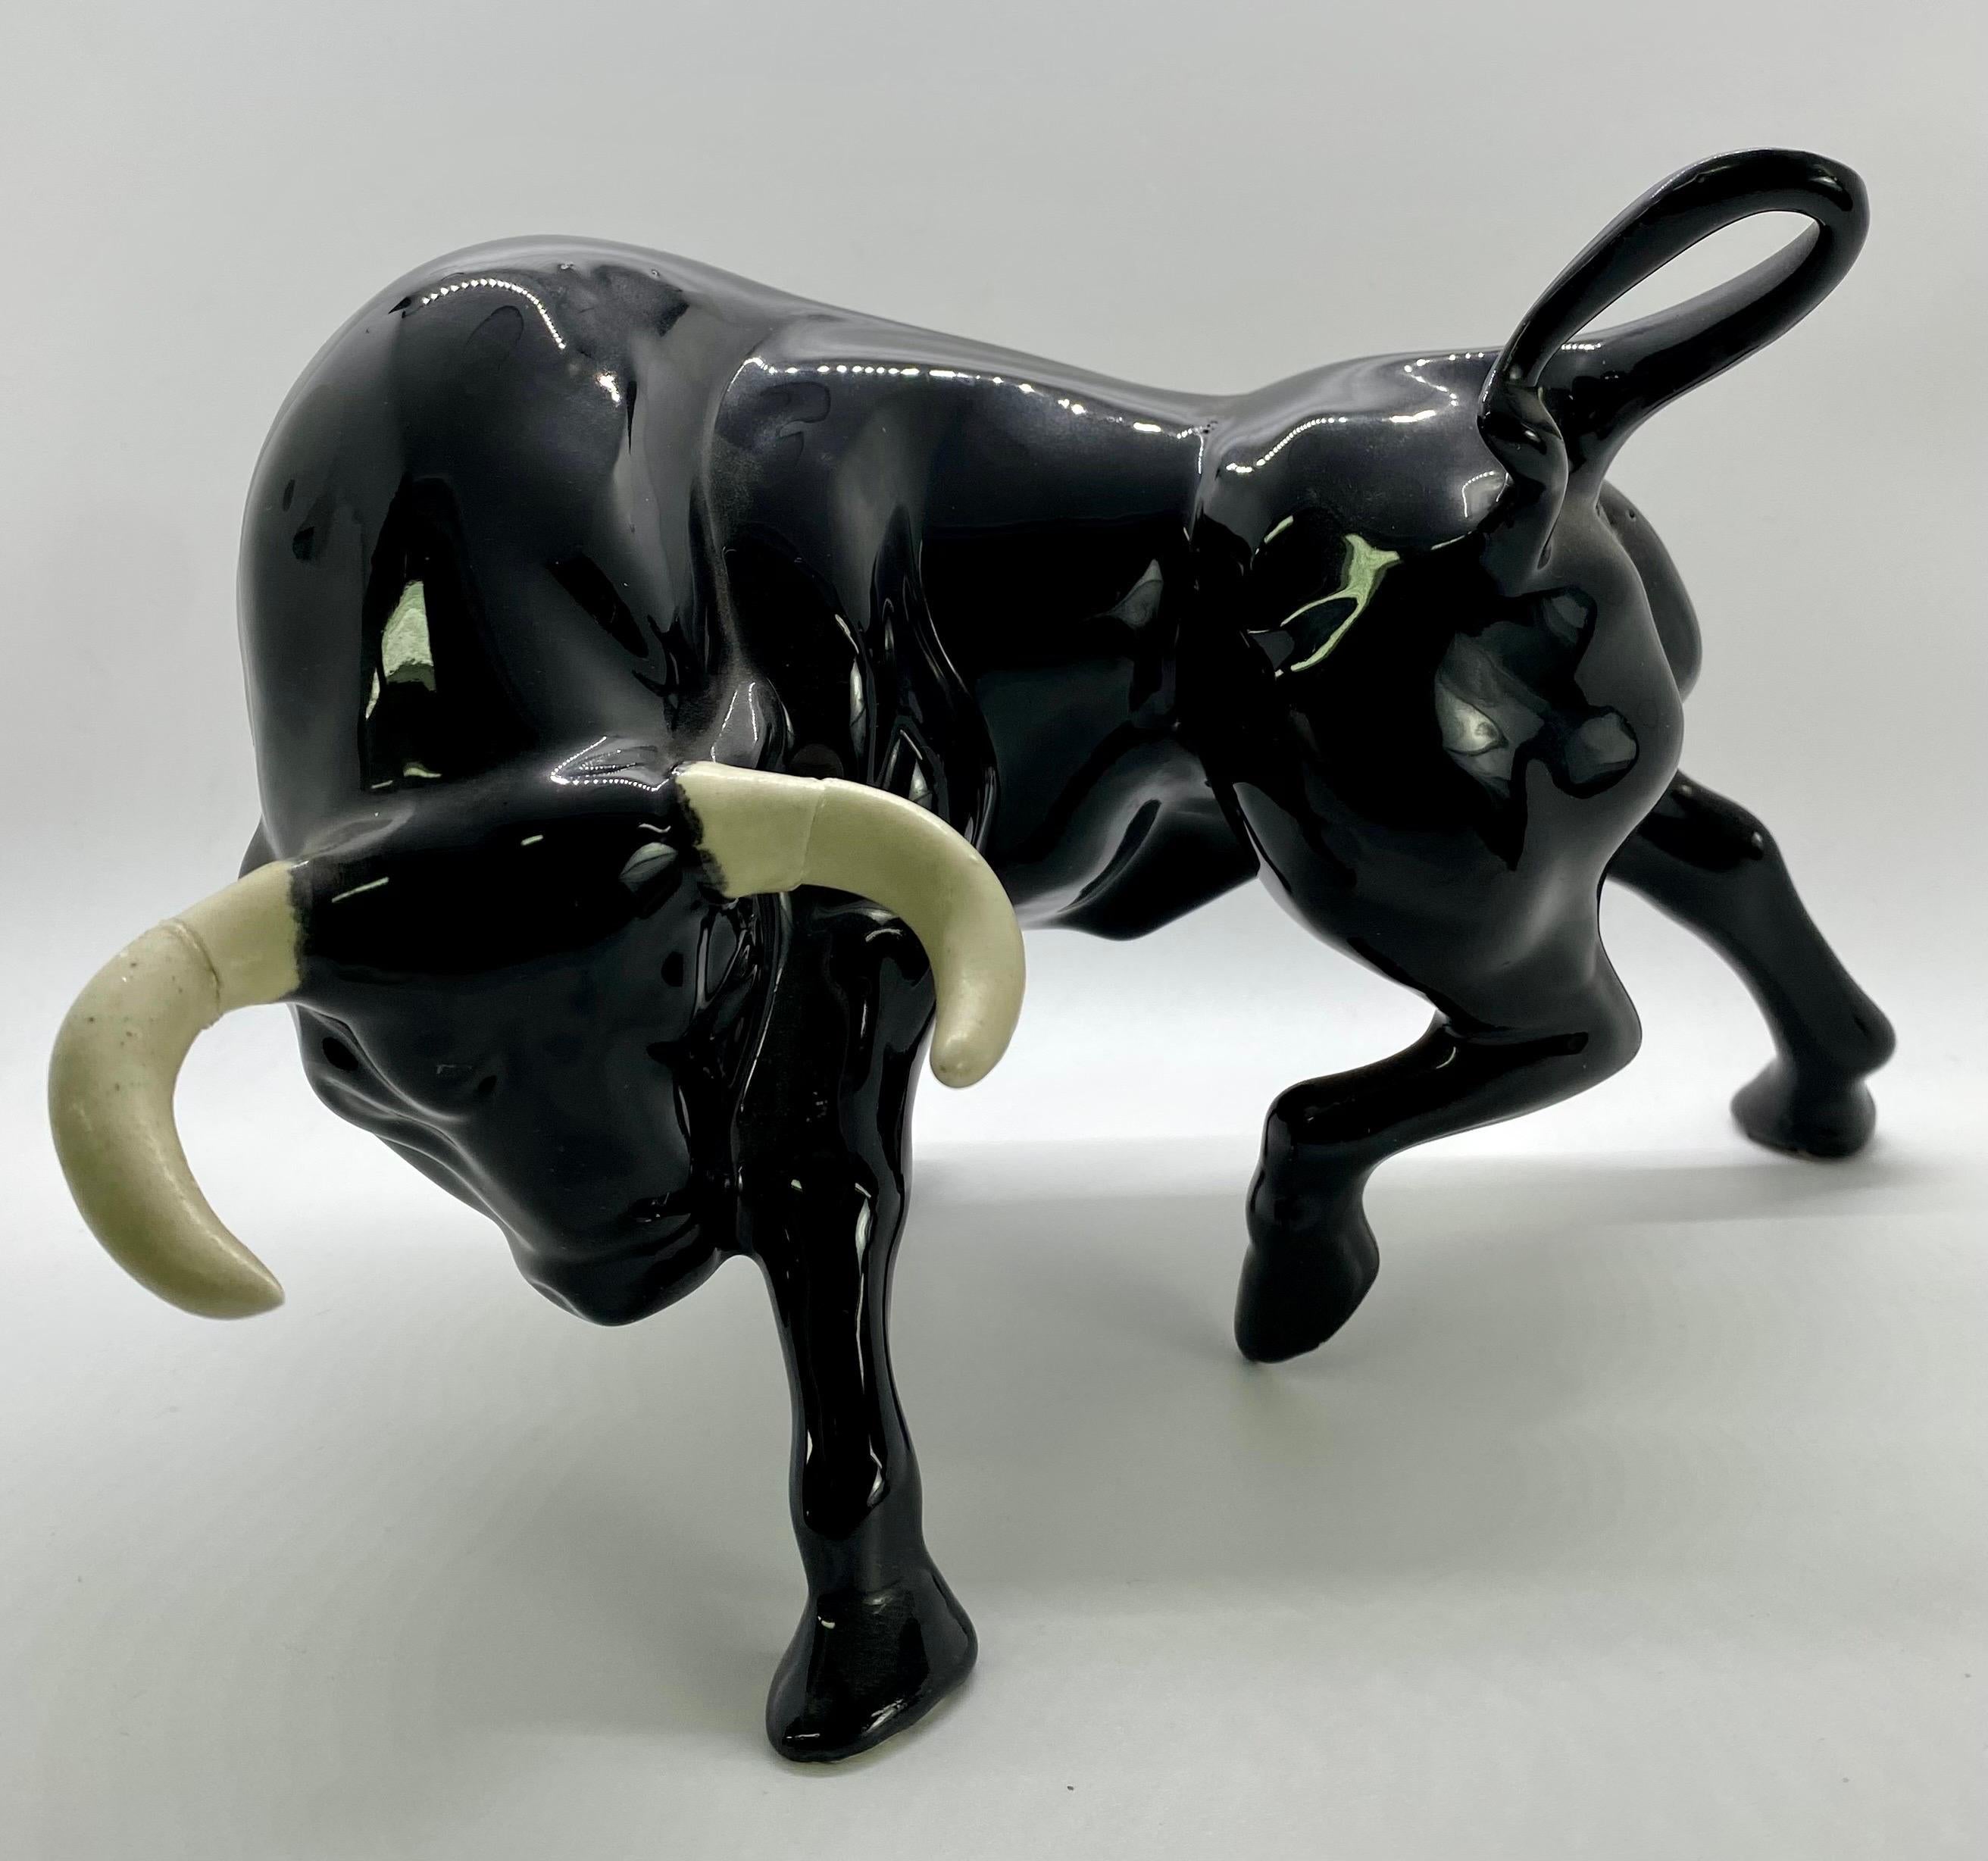 An exquisite pair of Mid-Century Modern figurines of two black bulls with white horns made of ceramics. One bull is looking up, the other one is looking down. The bulls are symbols of growth, positivity and optimism. 

Facing Down Bull Dimensions: